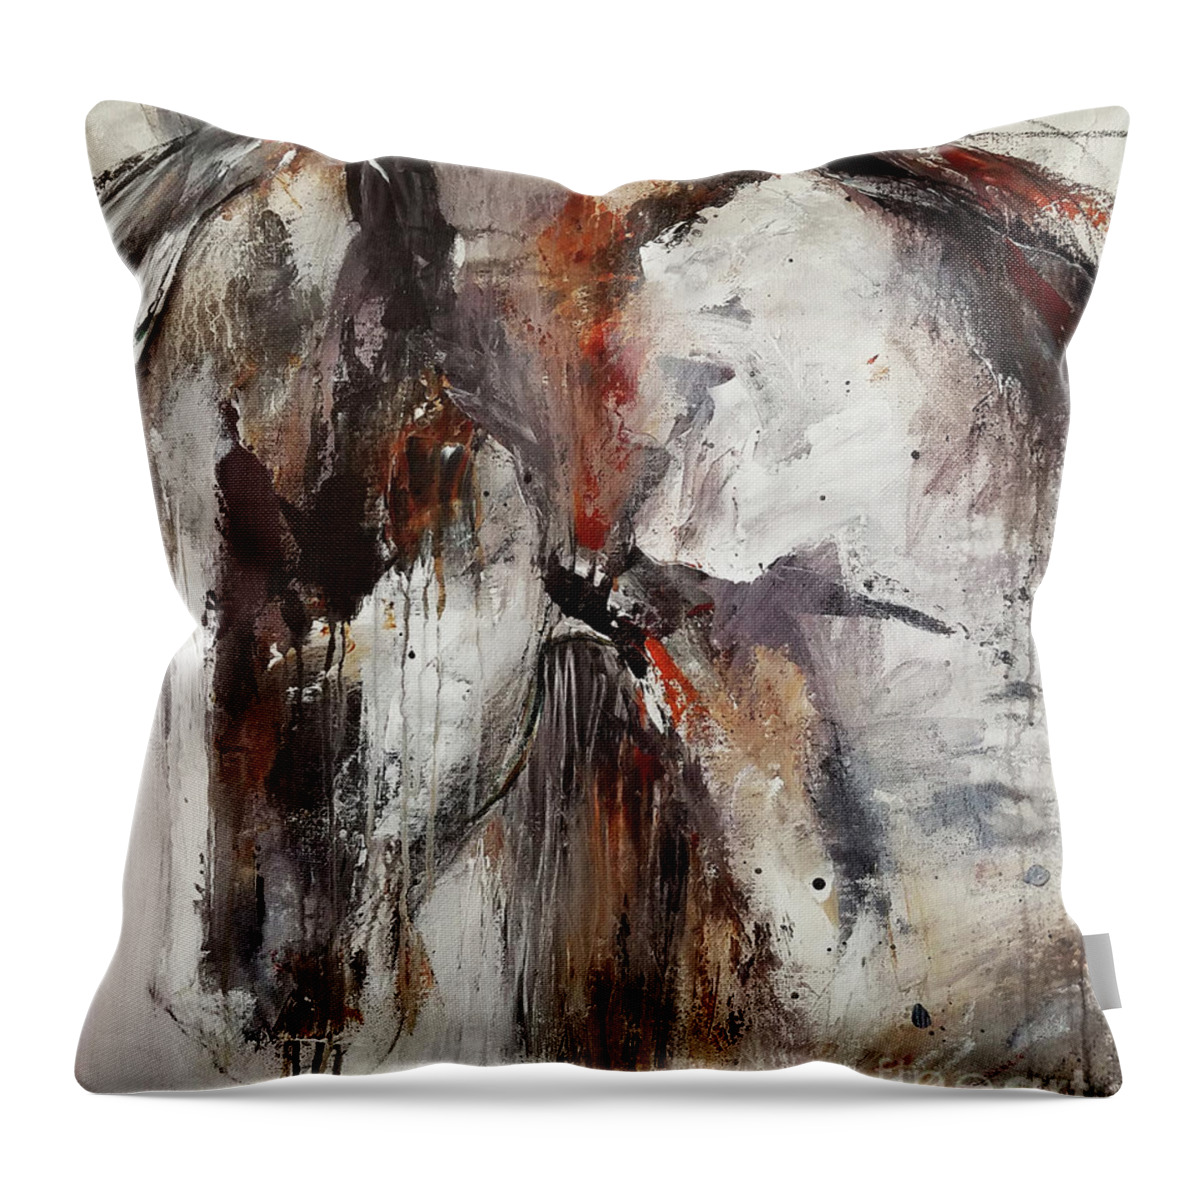 Abstract Throw Pillow featuring the painting Prosper by Cher Devereaux